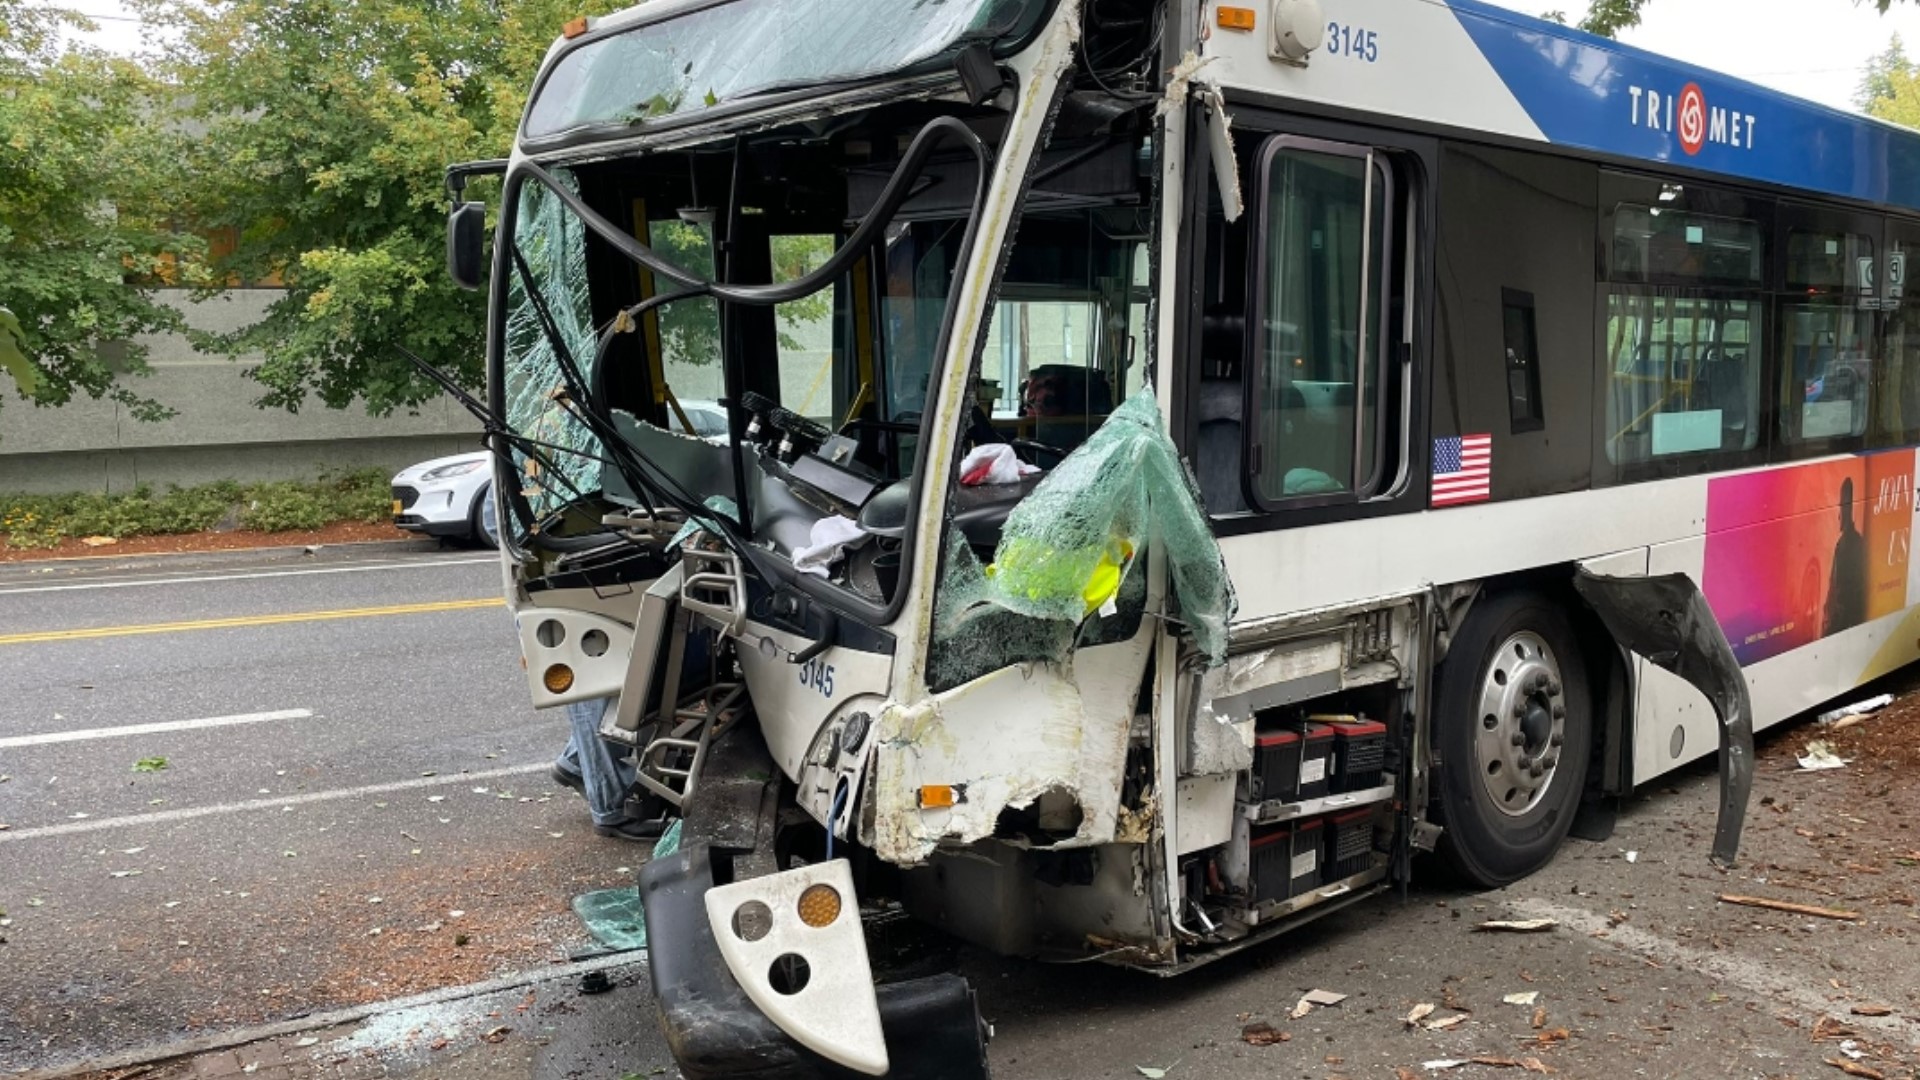 The crash happened near Northeast Glisan Street and 45th Avenue. The TriMet bus driver and three passengers were taken to the hospital, a TriMet spokesperson said.